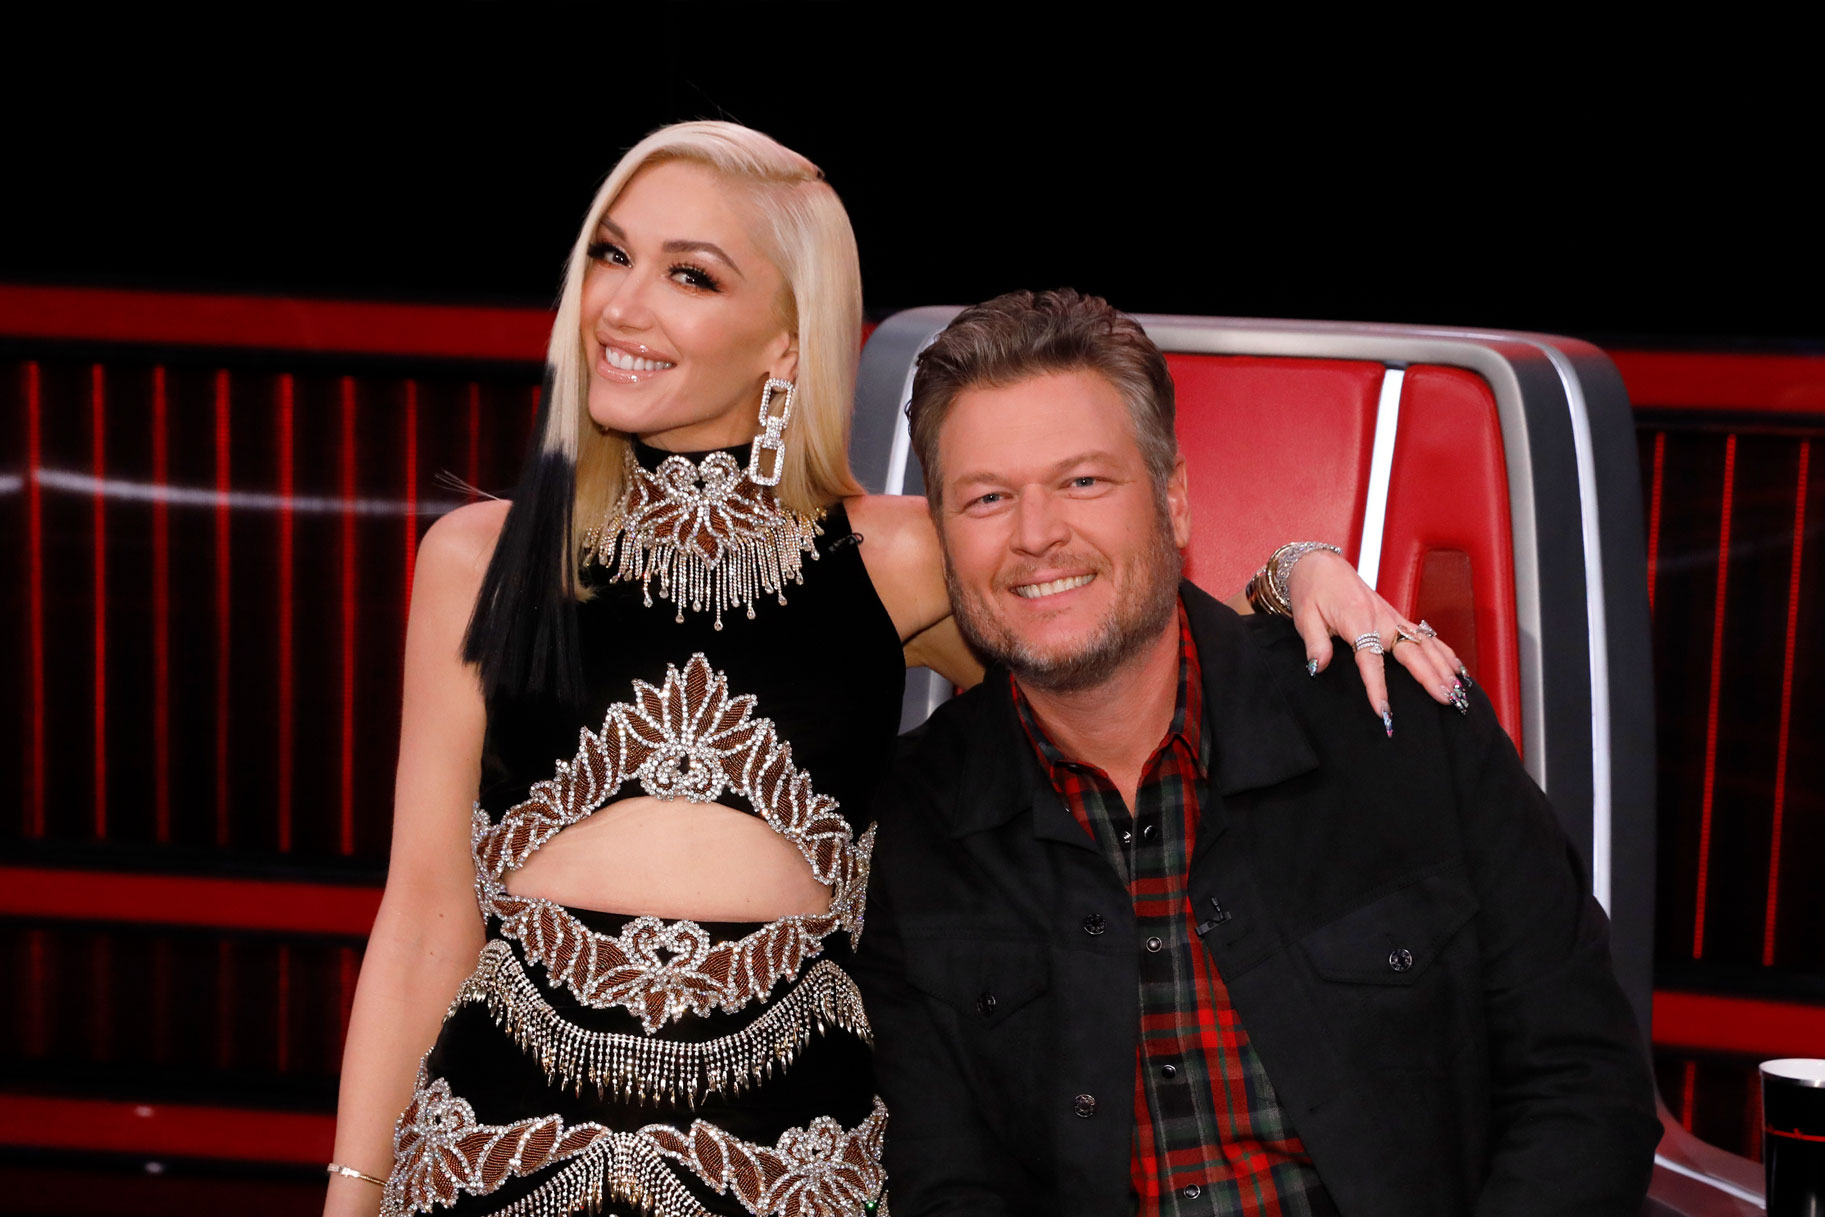 Gwen Stefani stands next to Blake Shelton who sits in his Voice chair. Both of them are smiling.